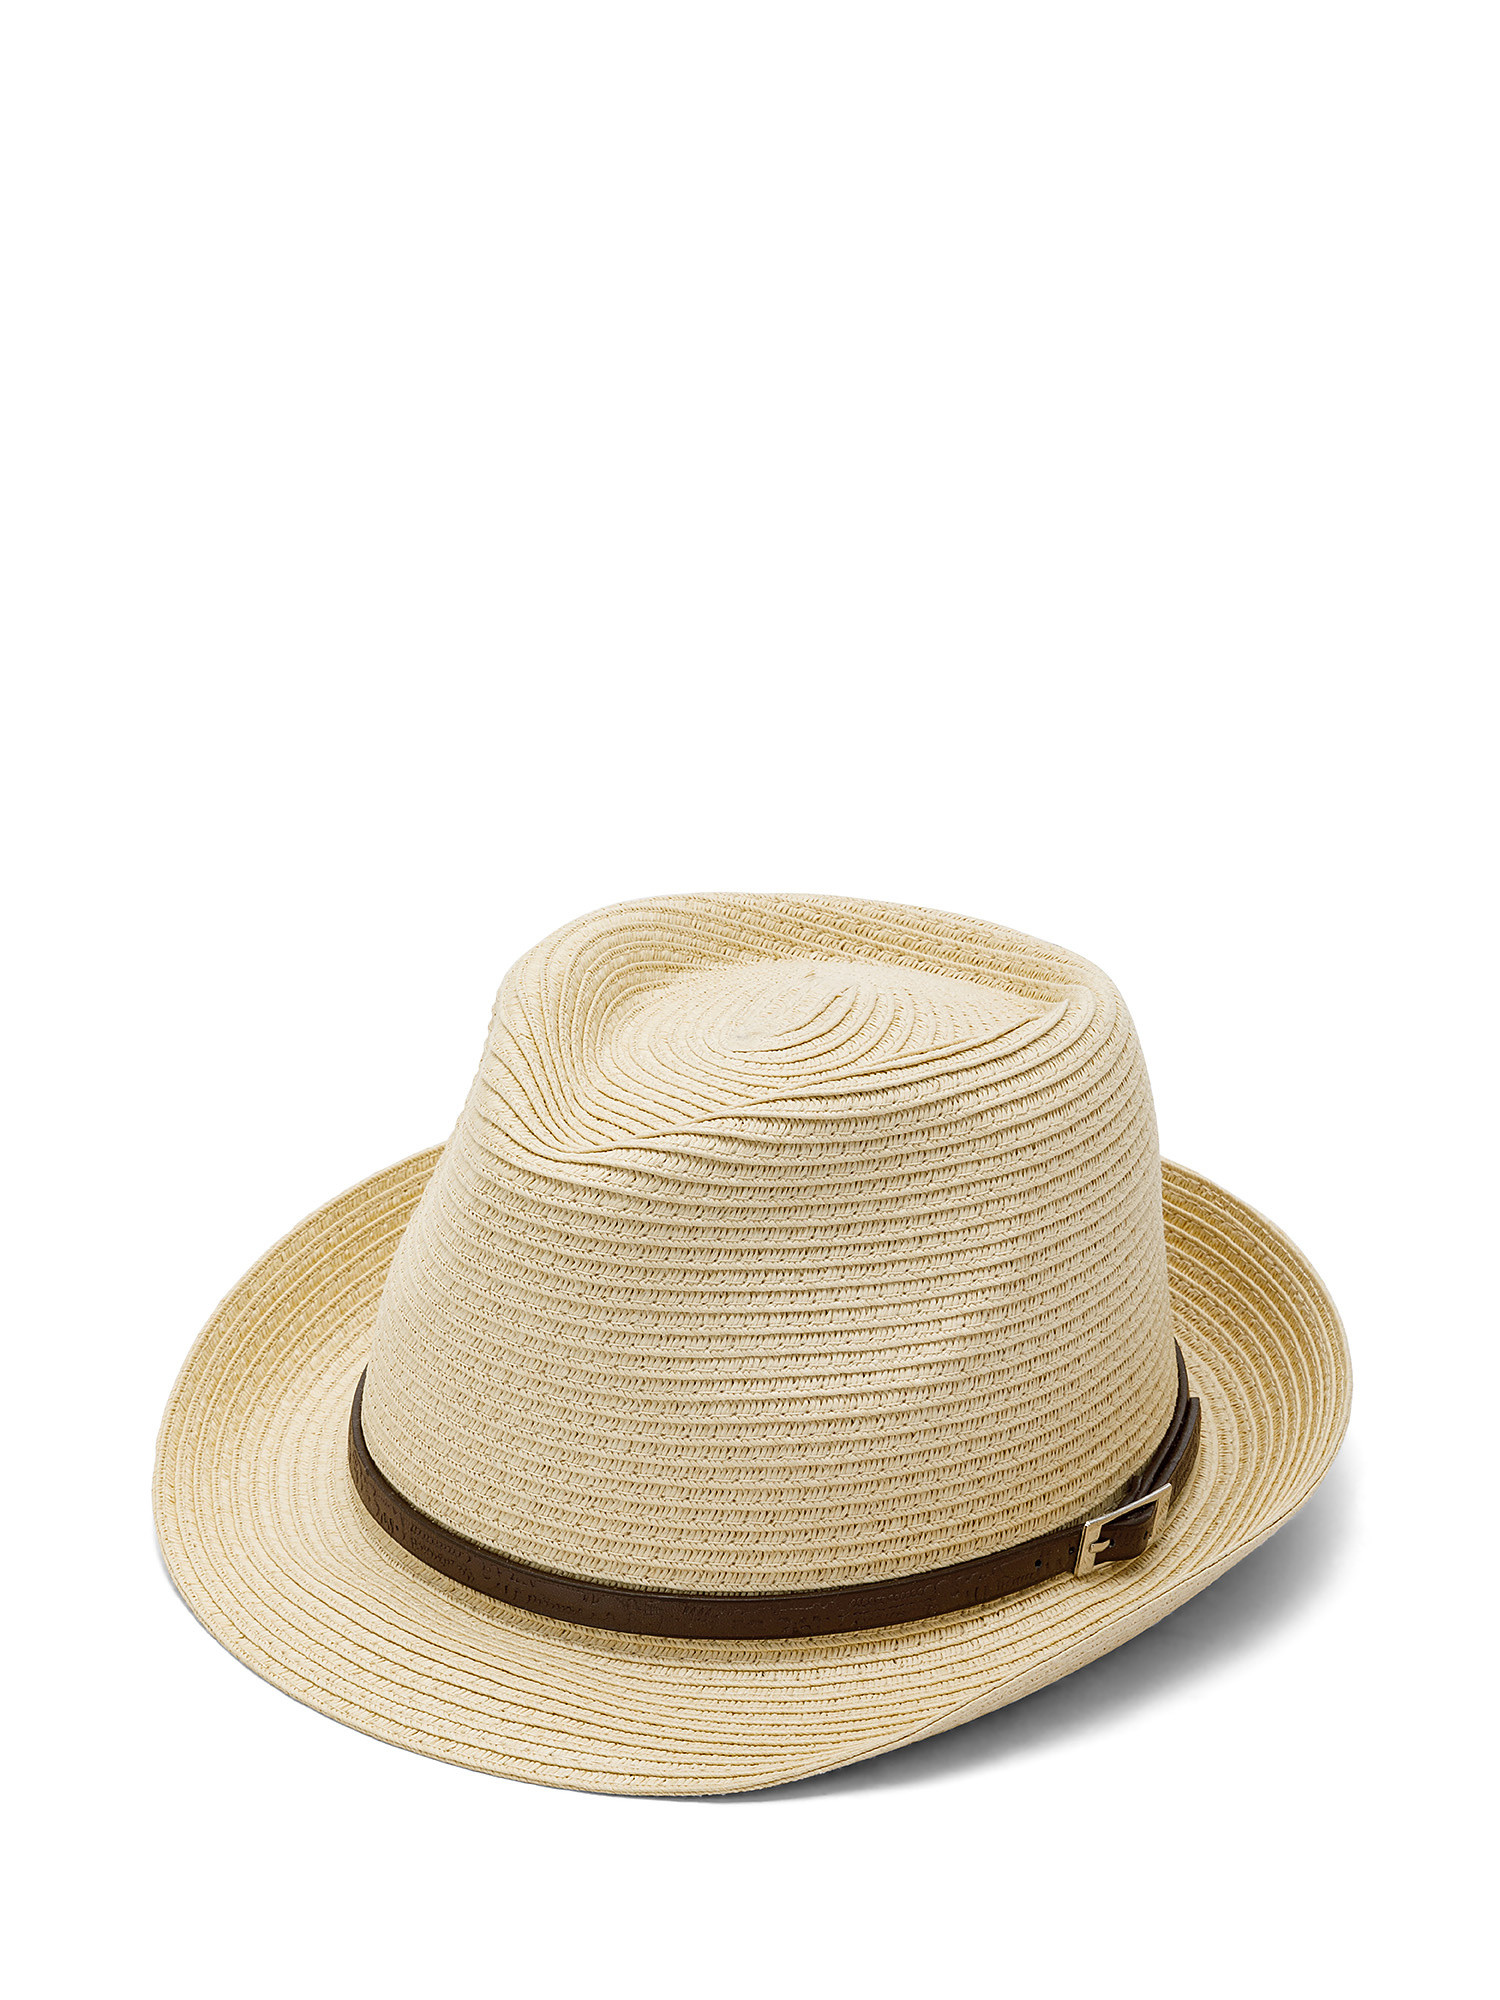 Luca D'Altieri - Alpinetto hat with strap, Beige, large image number 0